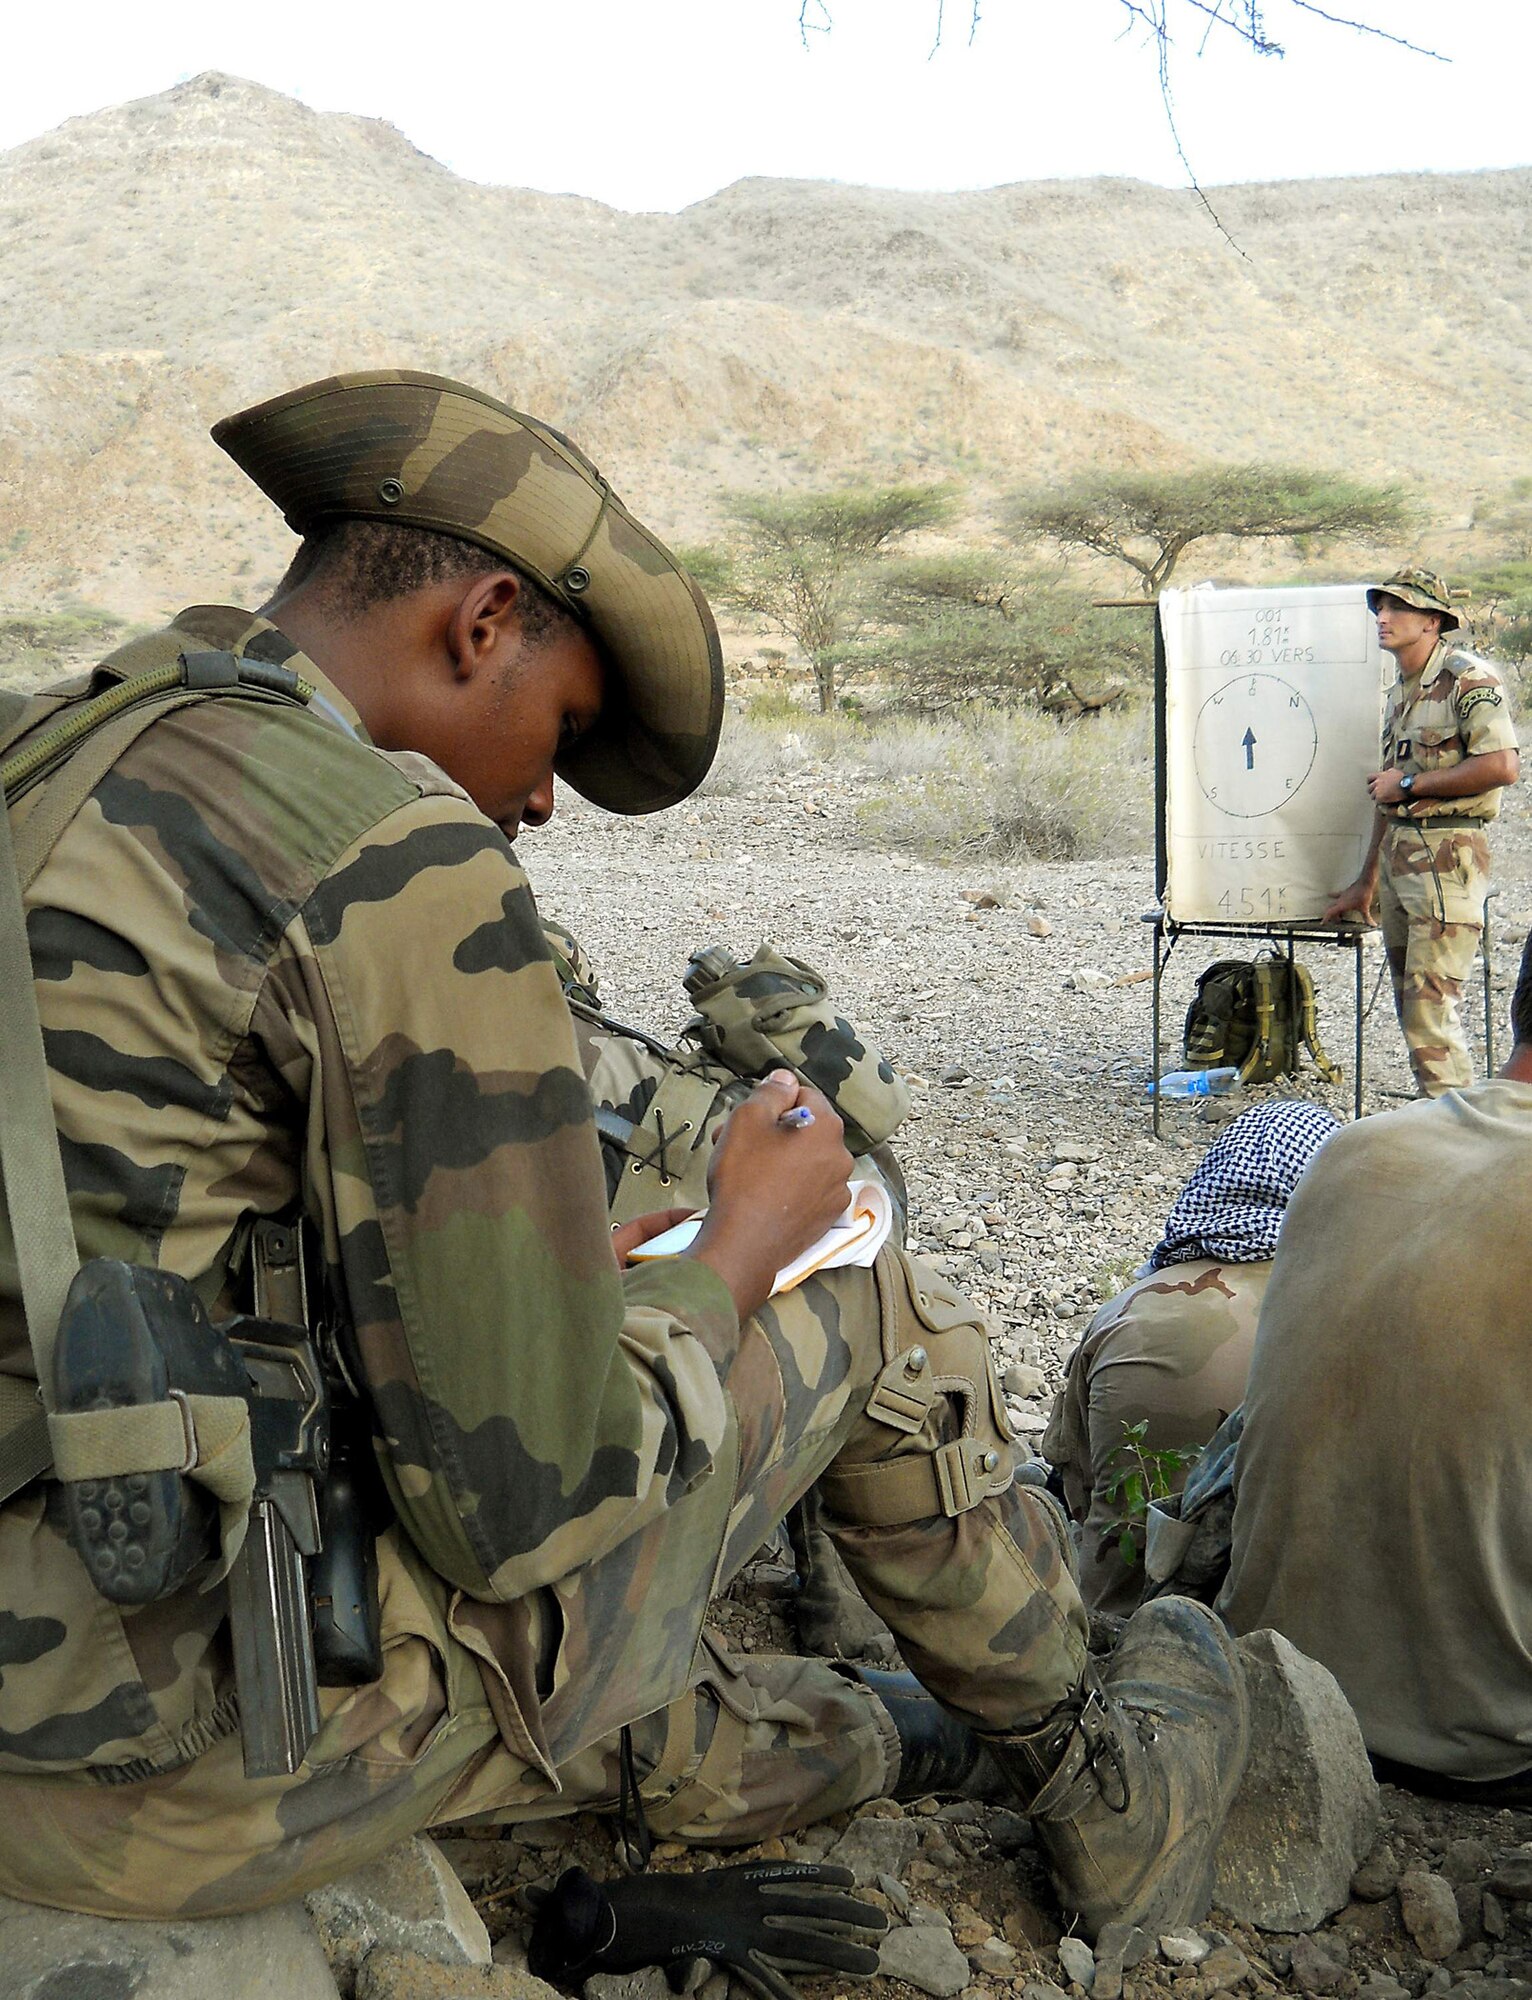 A member of the 5th French Marine Regiment takes notes on how to use a global positioning system device during a desert combat training course which began May 31, 2011, in the Bour Ougoul training area in Djibouti. The 10-day course provided nearly 120 French and 40 U.S. service members with a basic knowledge of field tactics and survival techniques to be used in a desert environment. (U.S. Air Force photo/Staff Sgt. R.J. Biermann)